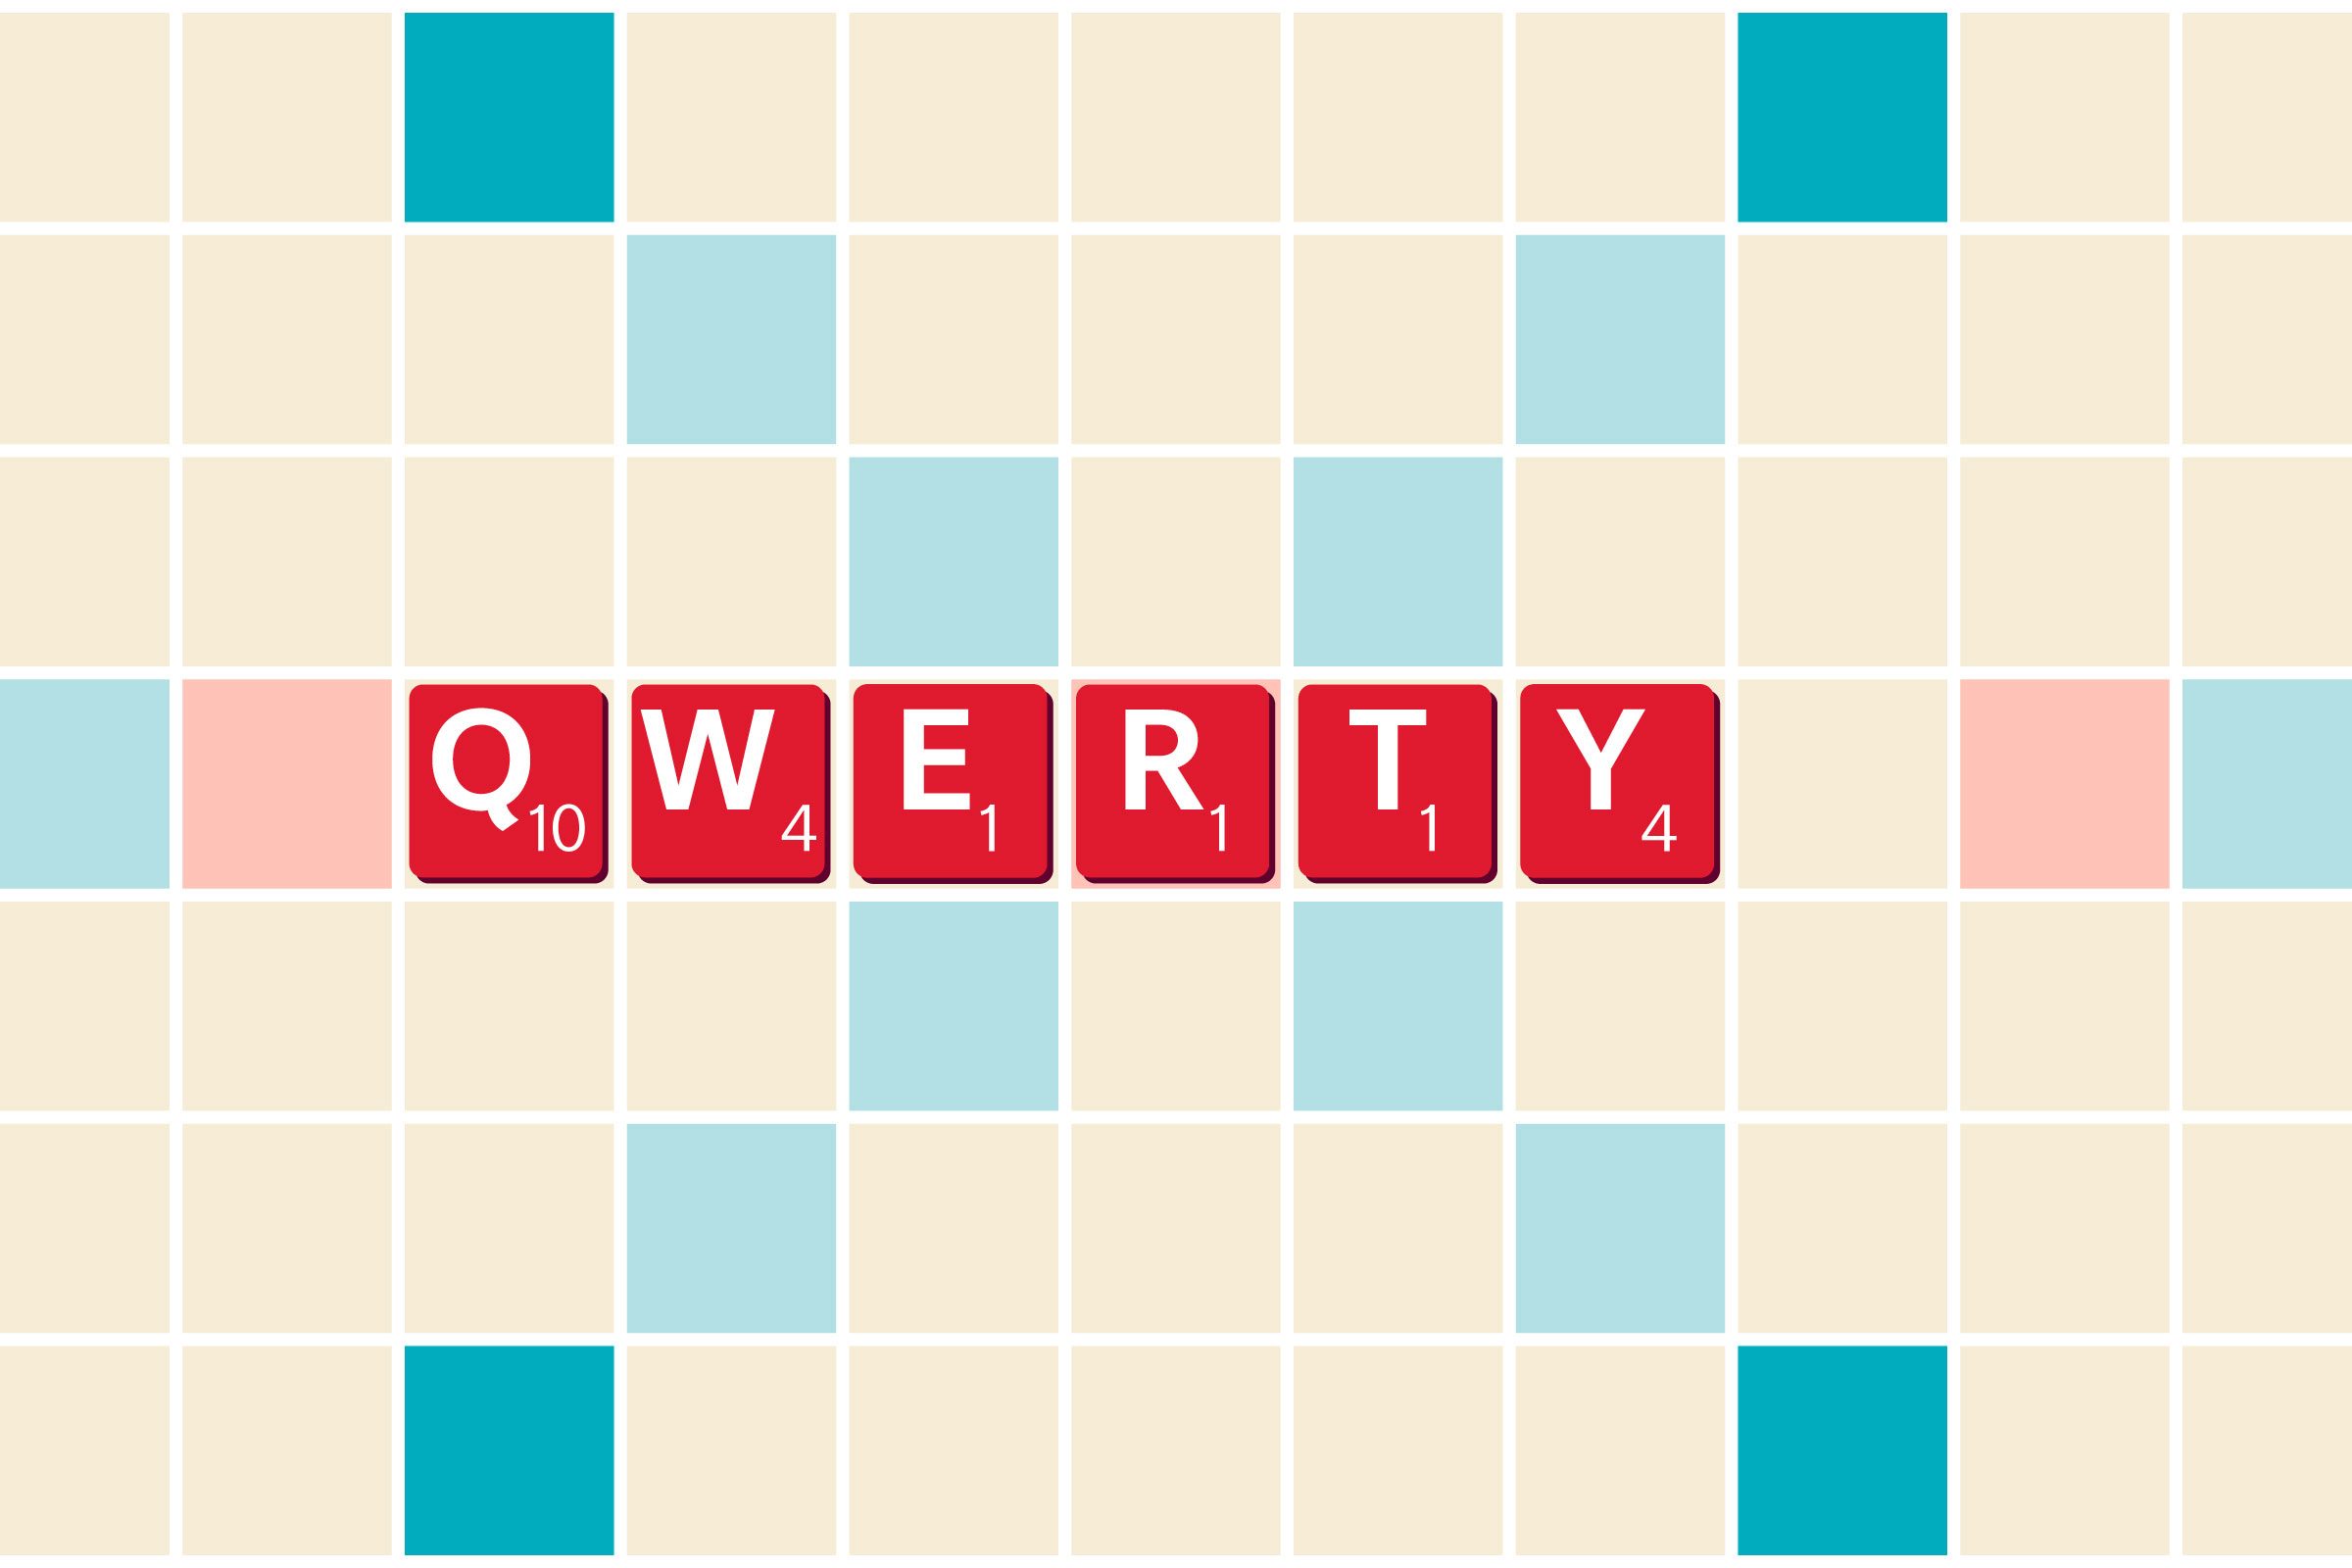 35 Best Scrabble Words To Help You Win The Game Graphic Qwerty